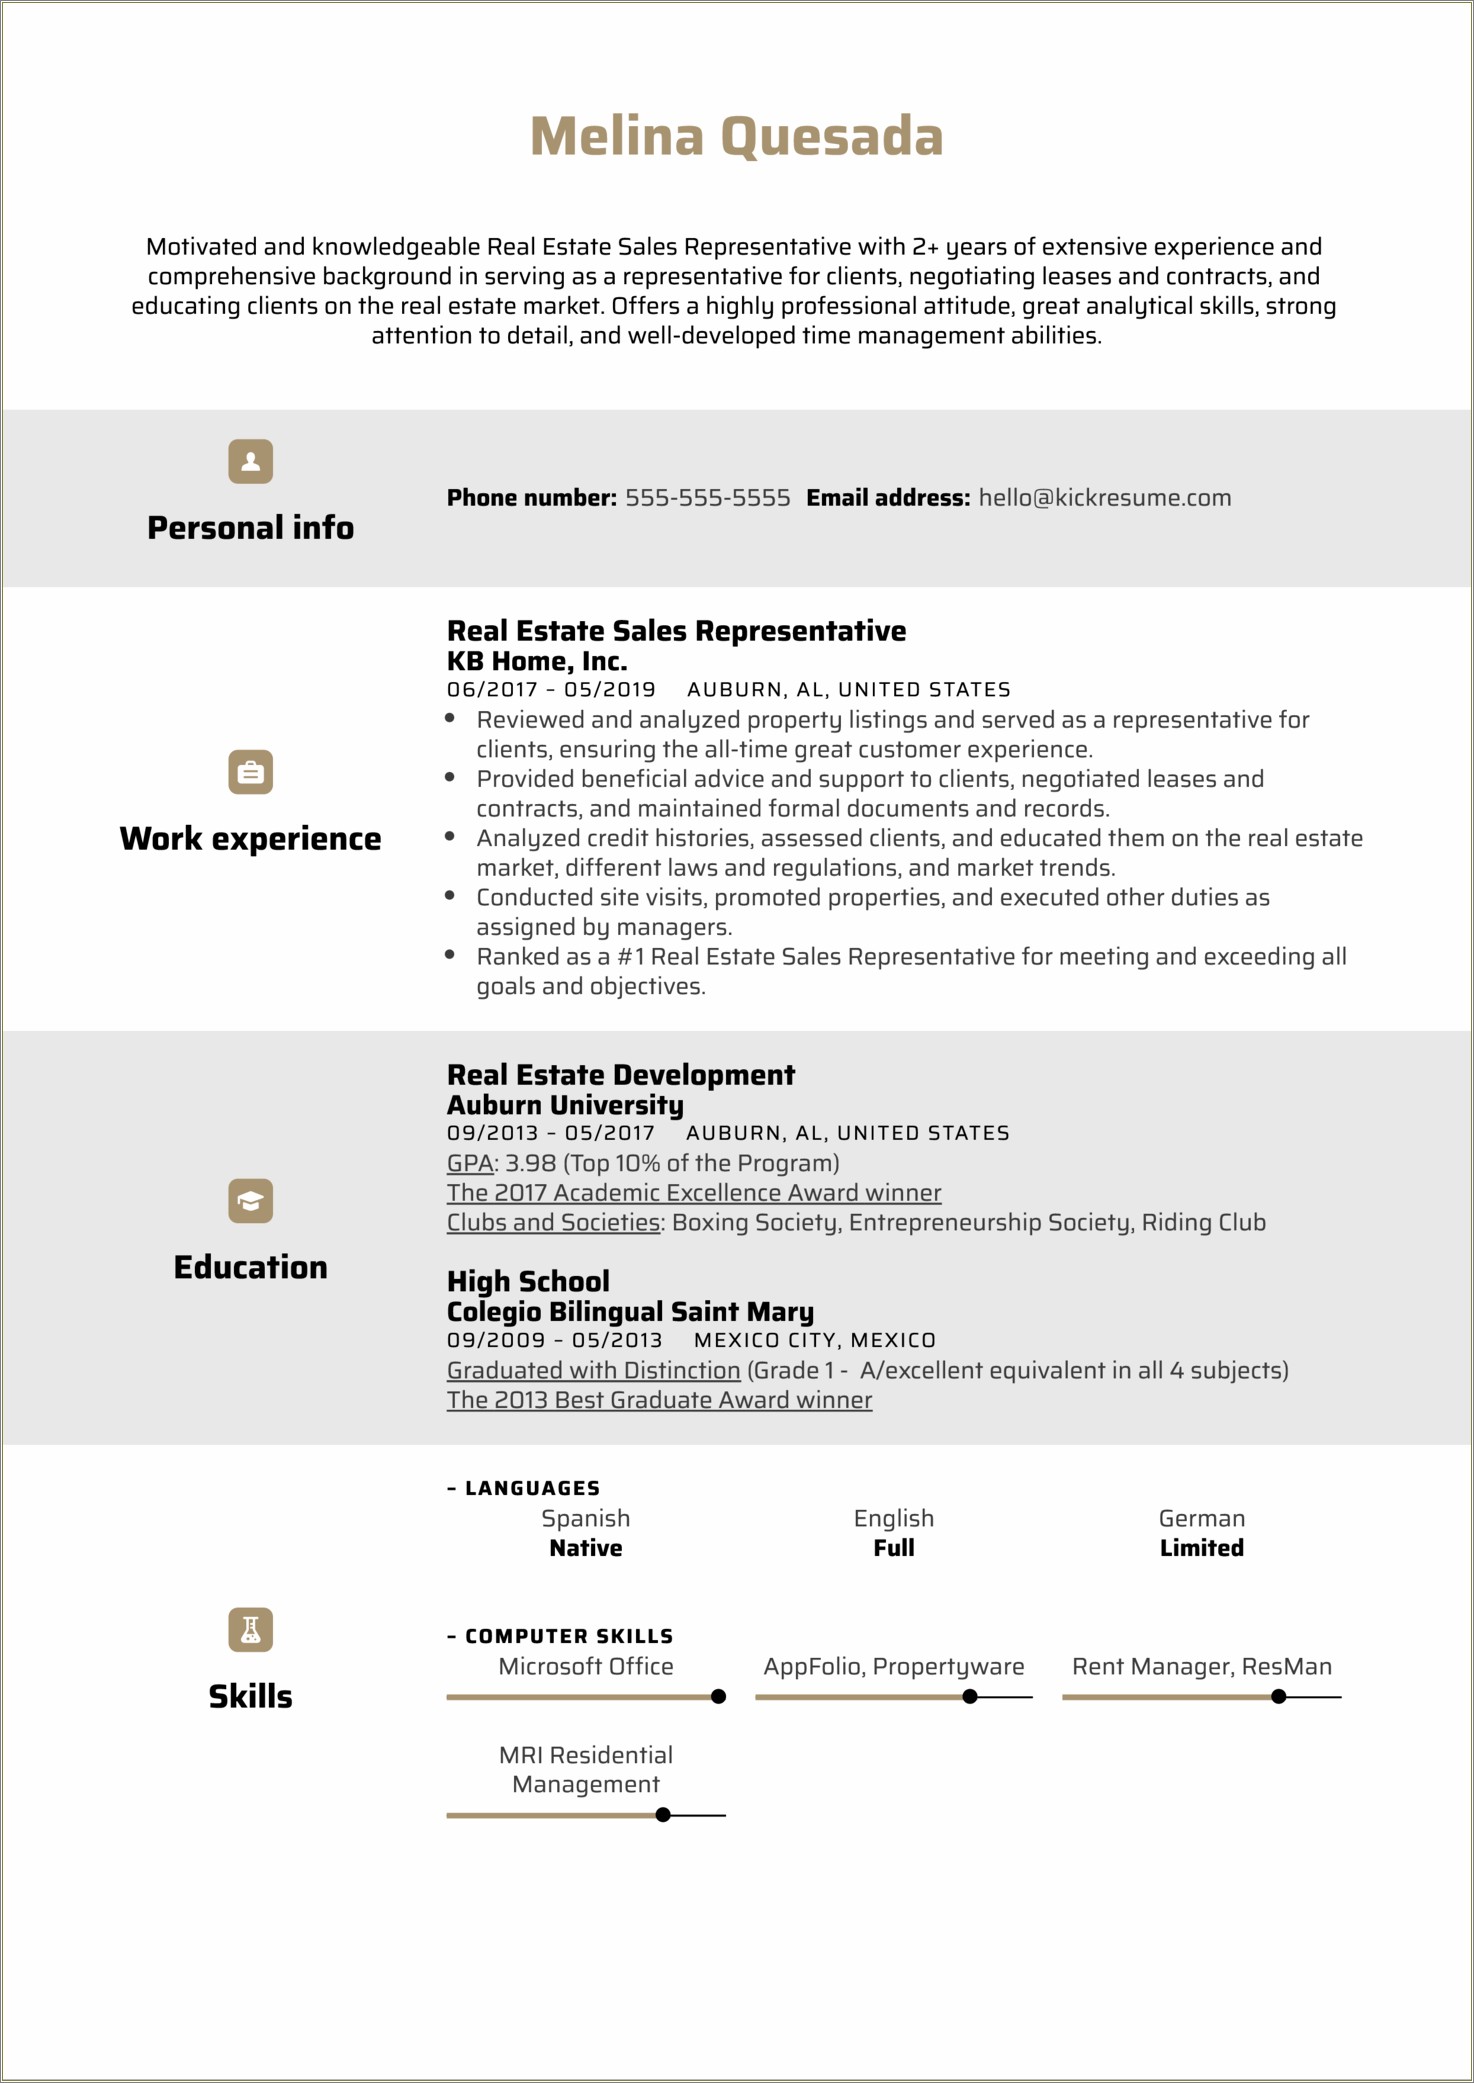 Example Of A Resume For A Sales Representative